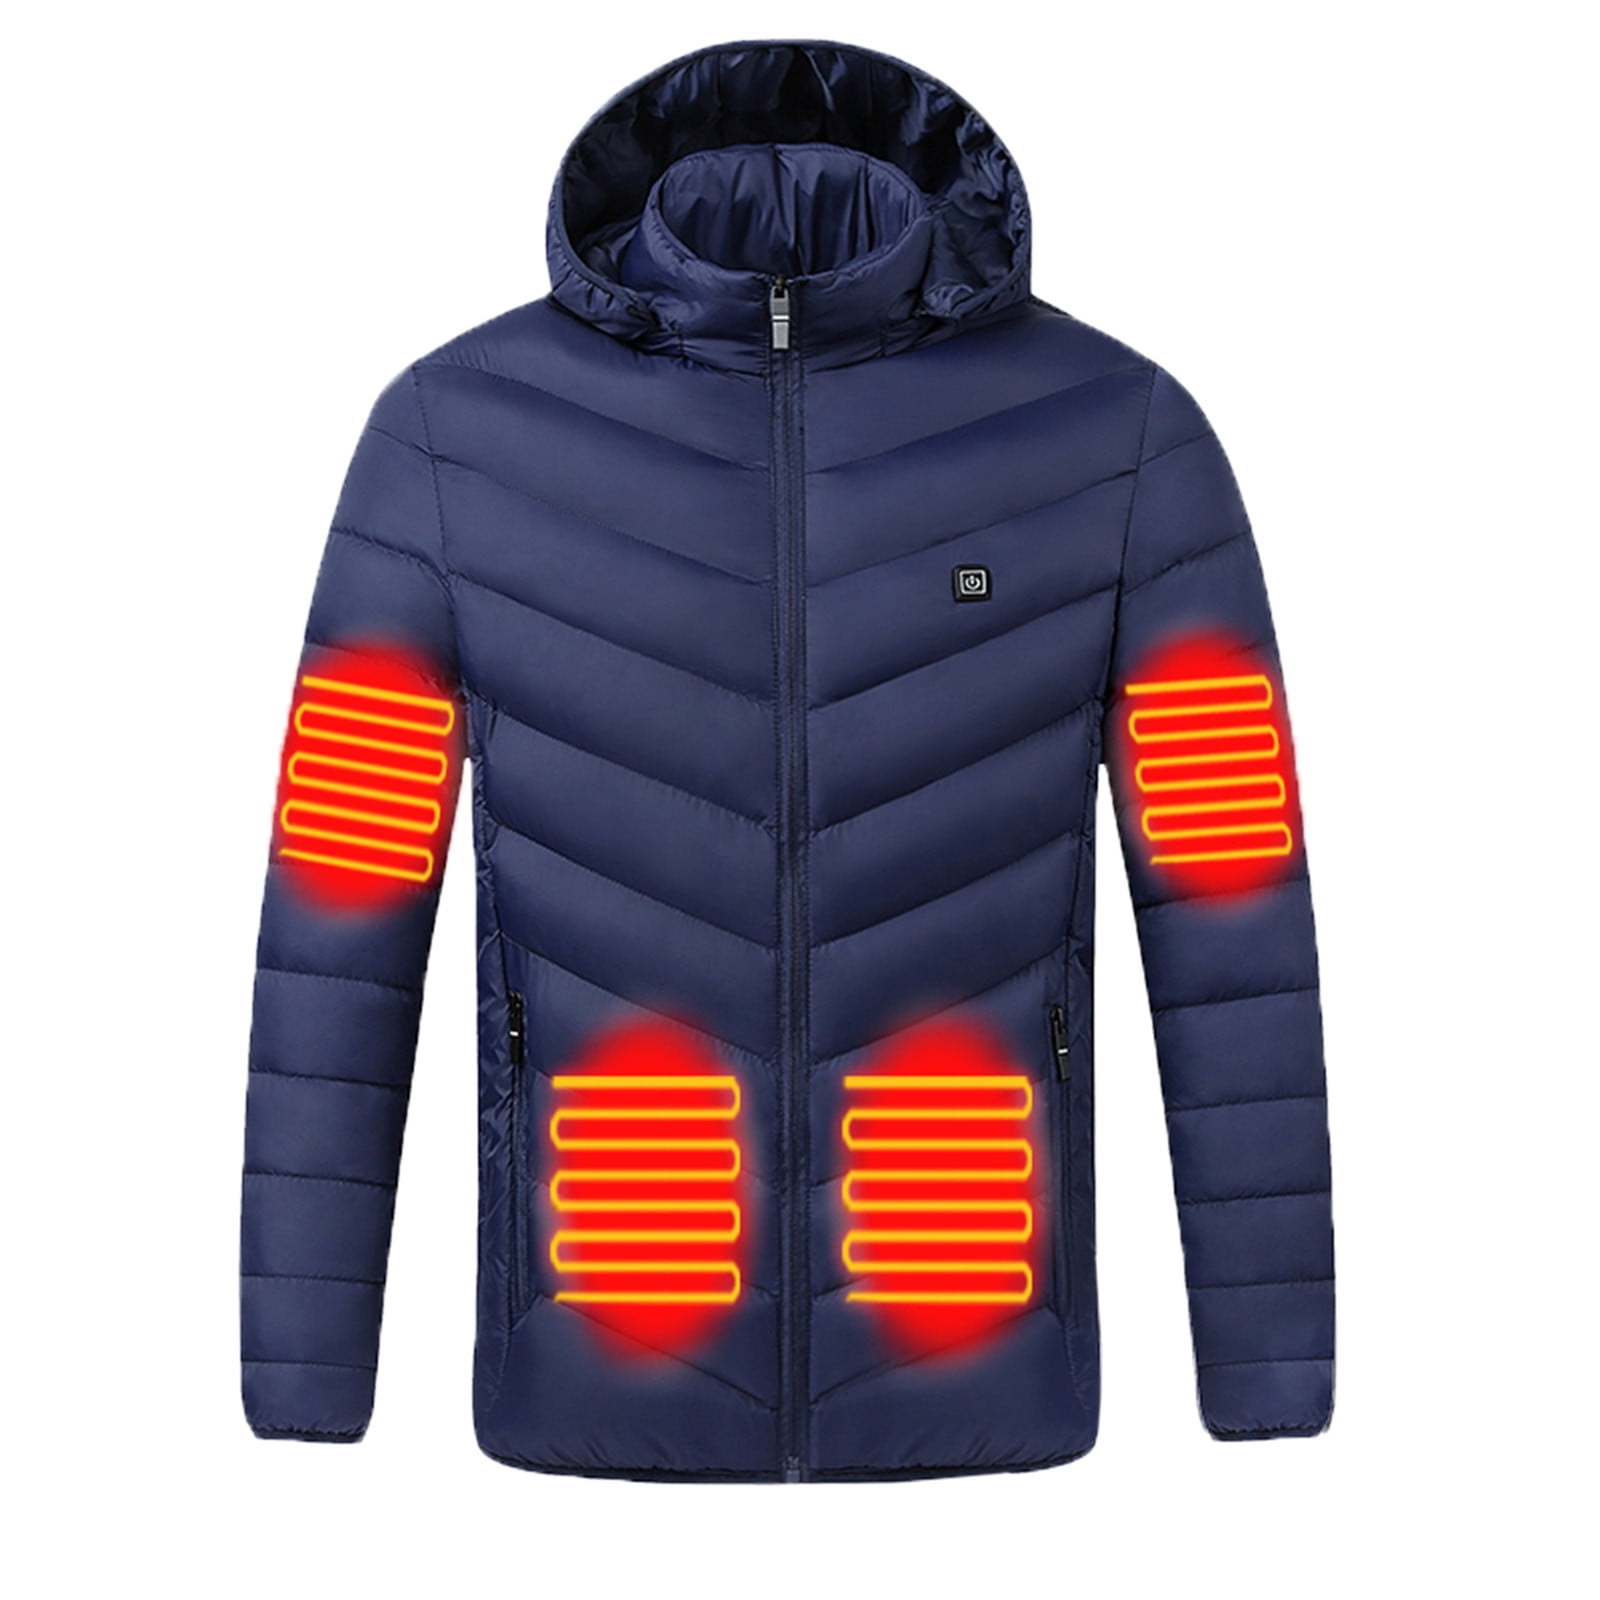 MRULIC winter coats for men Outdoor Warm Clothing Heated For Riding ...